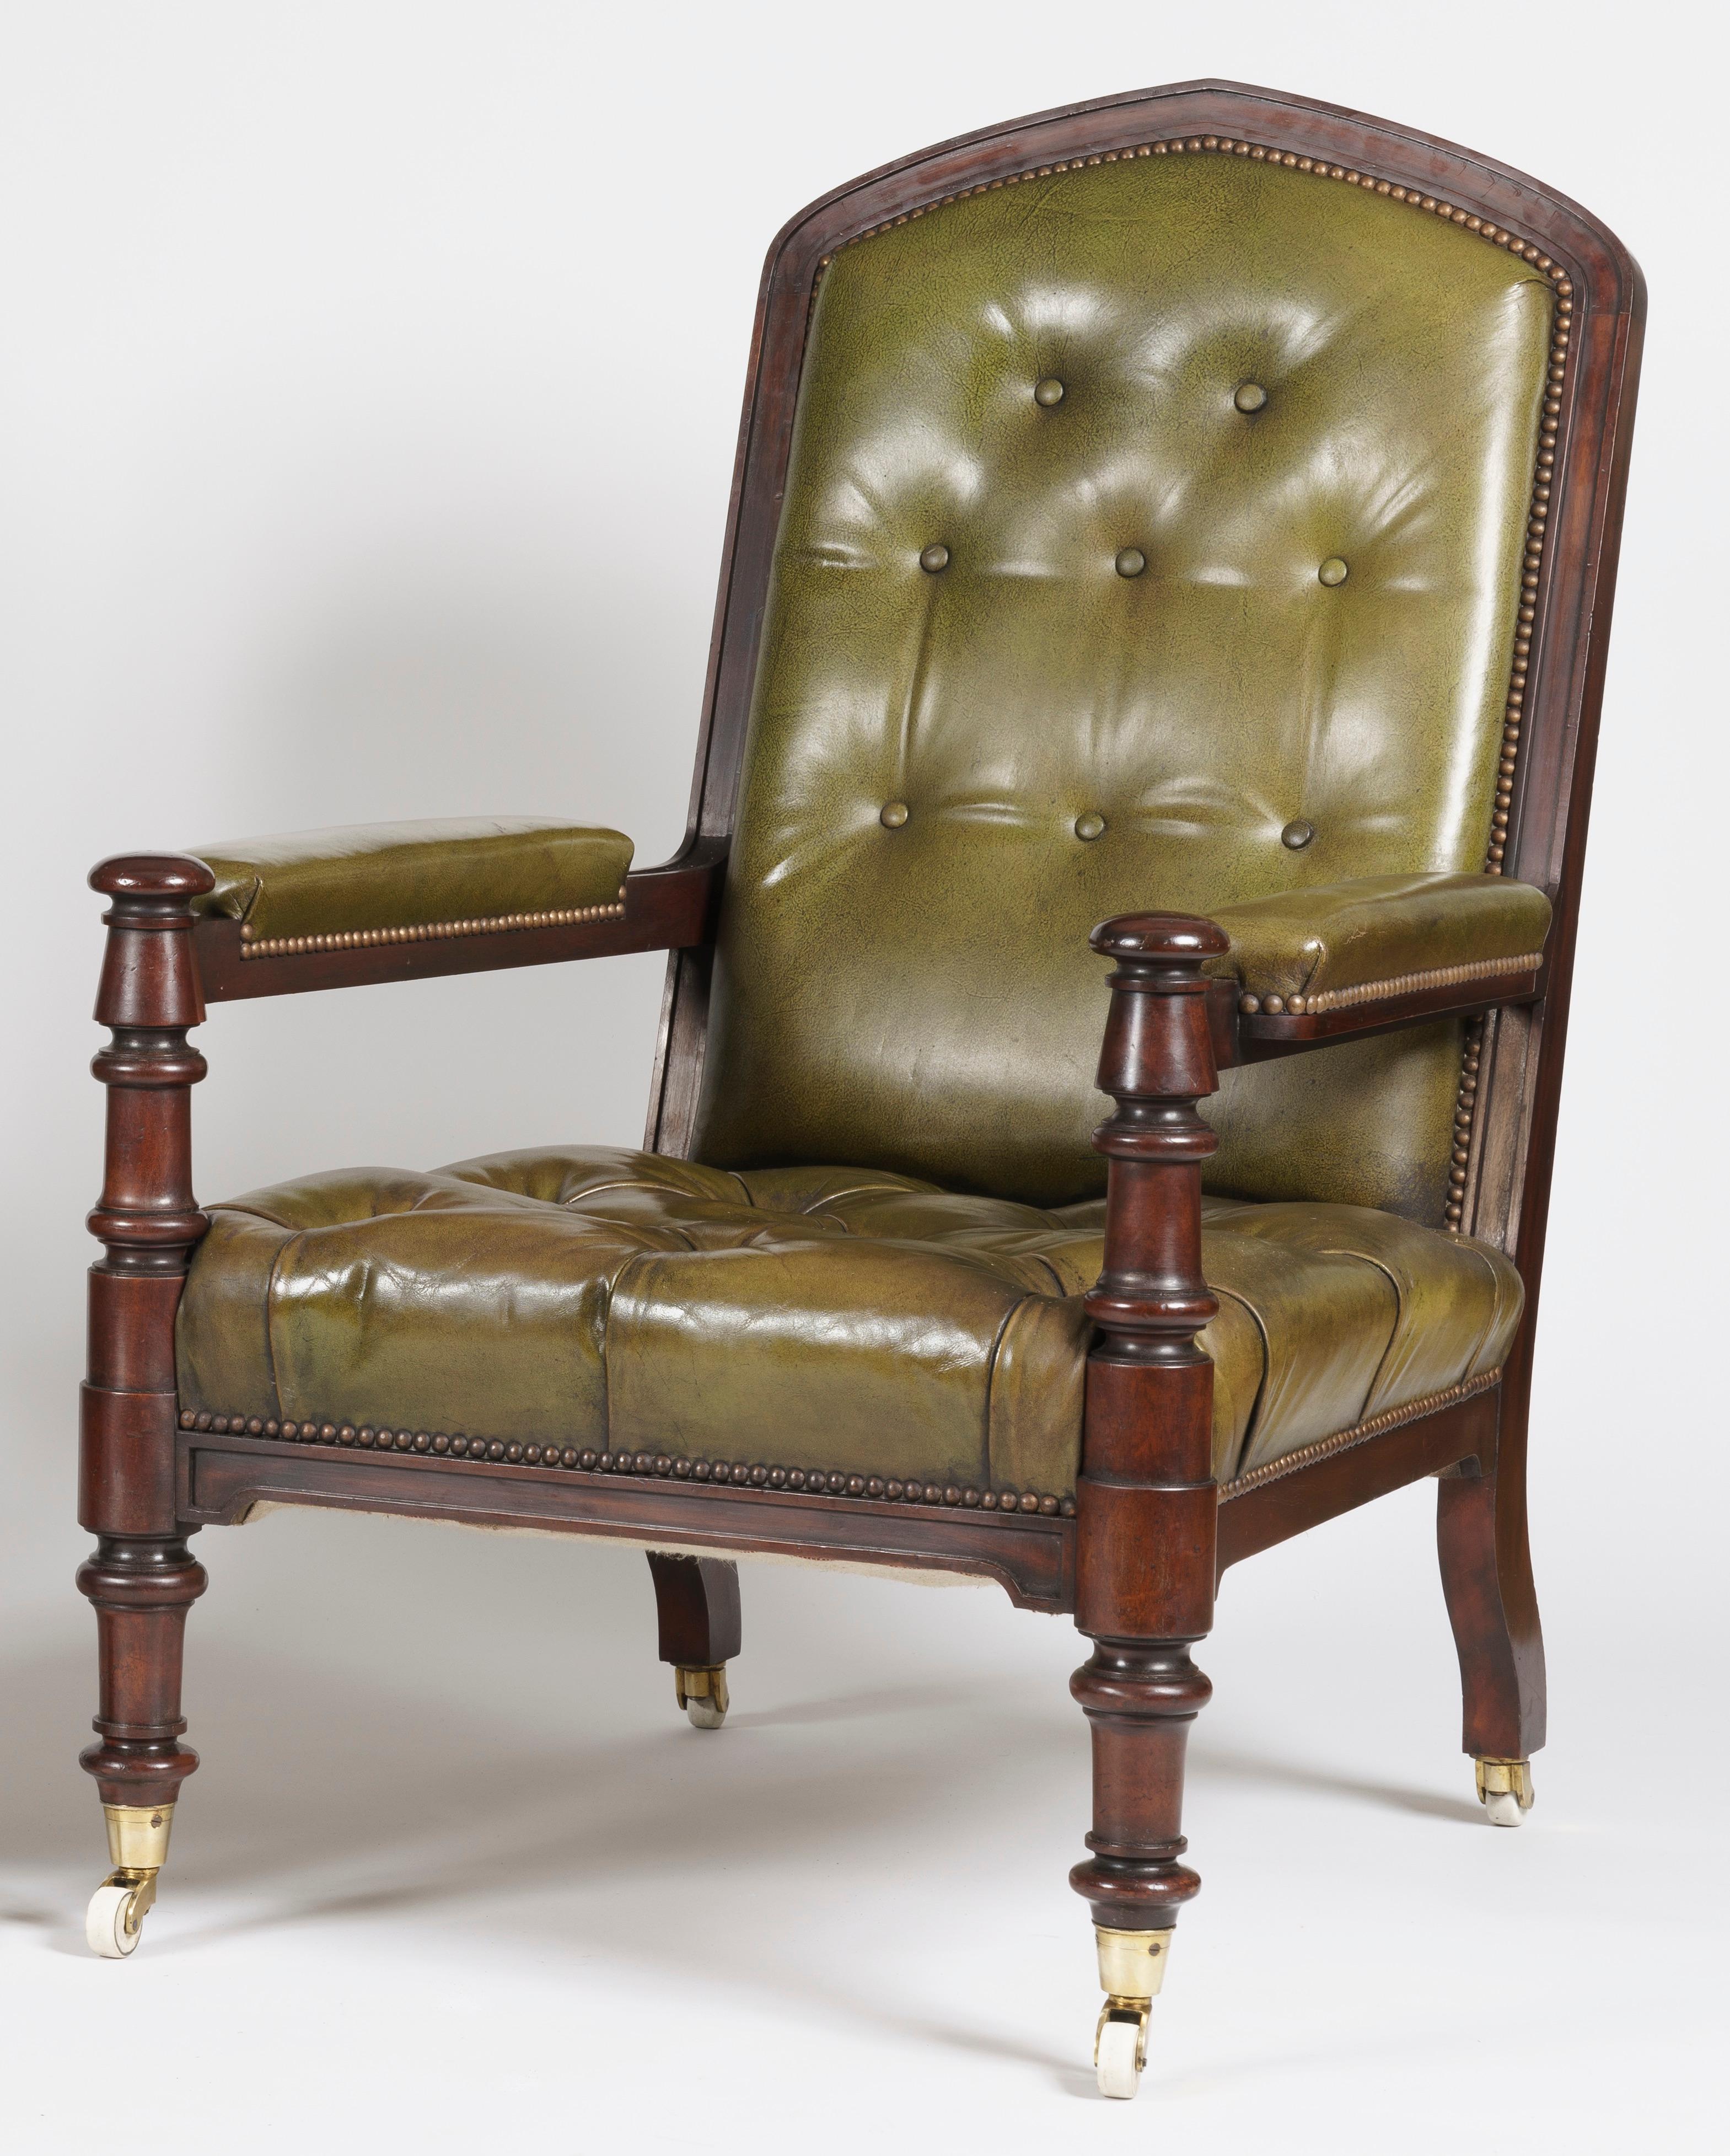 Pair of Georgian Mahogany and Green Leather Armchairs (Englisch)